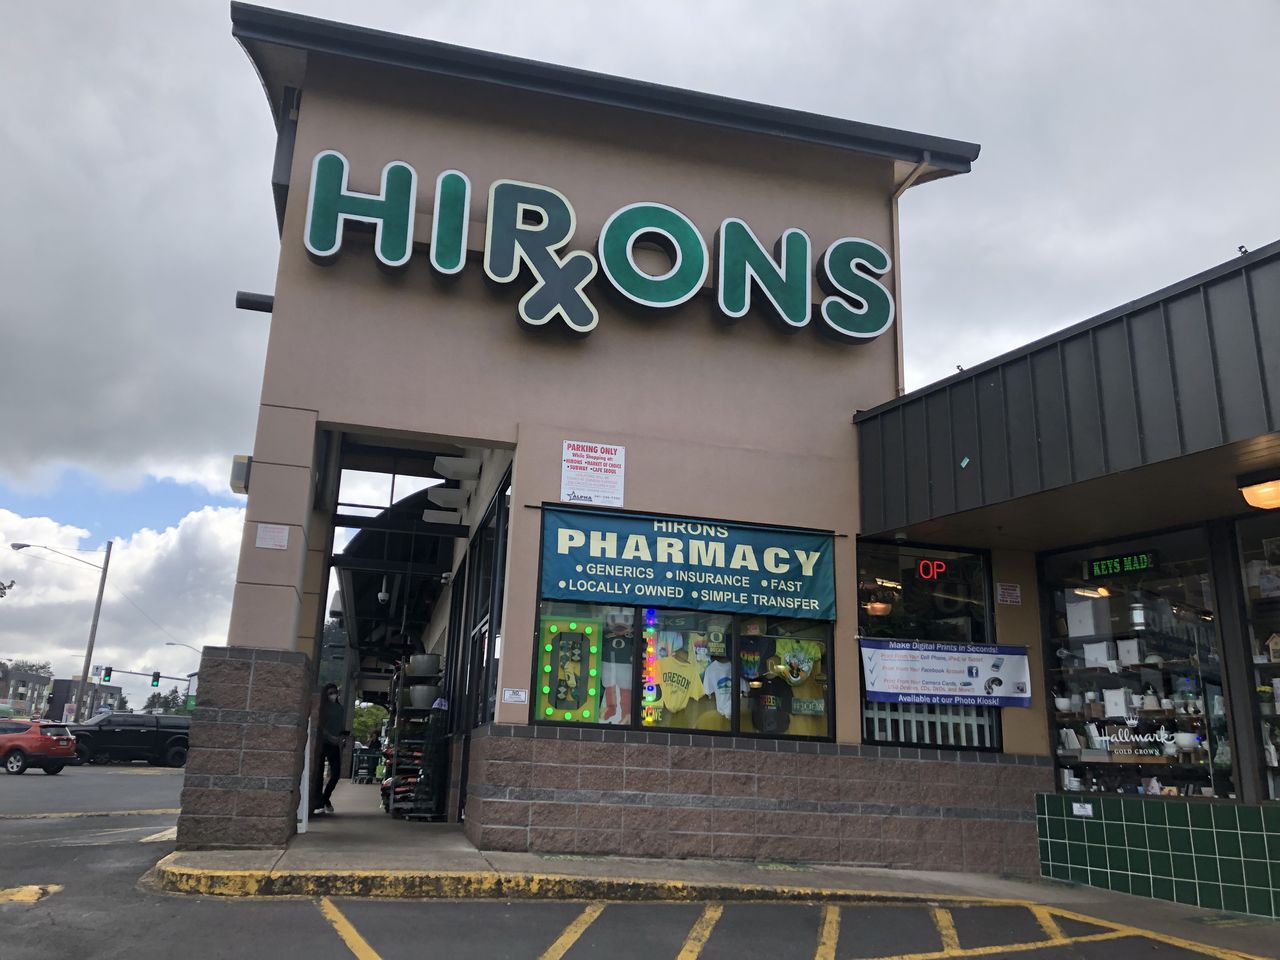 A tan building with green lettering on the front spelling out "Hirons" with a pharmacy "Rx" symbol used for the "R". Below the logo is a window with the words "pharmacy" and filled with lights and green and yellow Oregon Ducks gear.